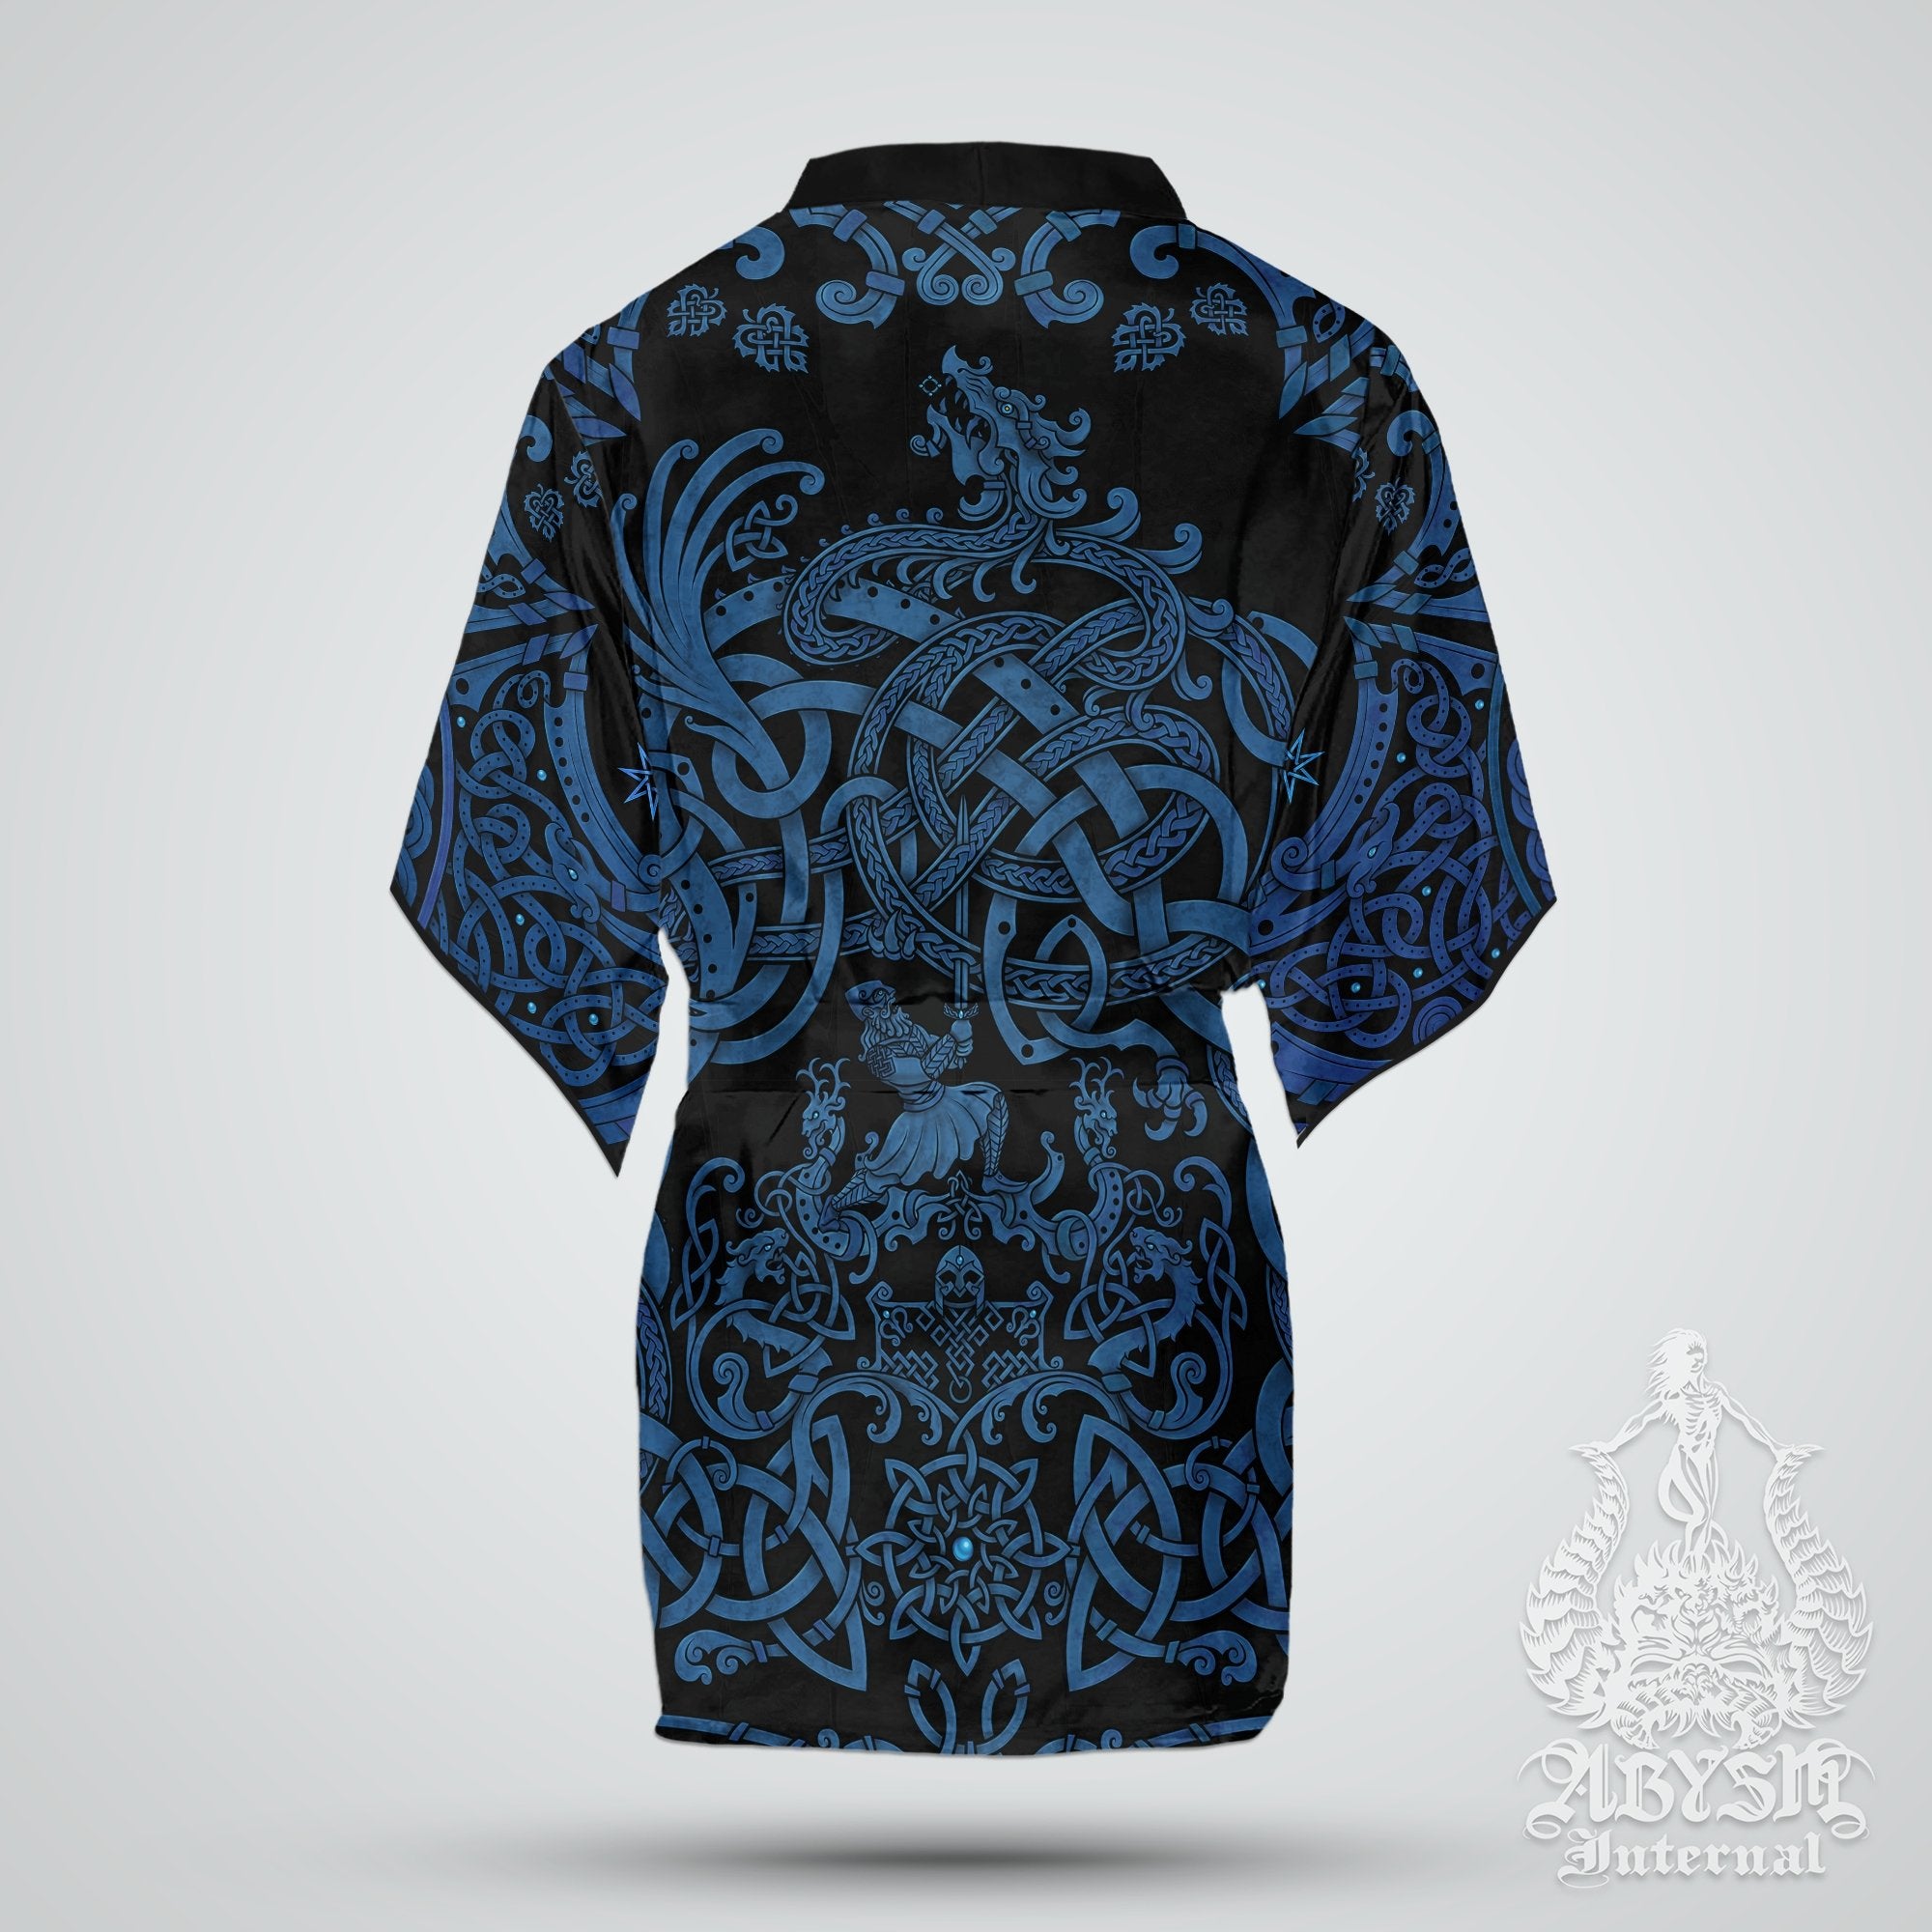 Viking Cover Up, Beach Outfit, Norse Party Kimono, Summer Festival Robe, Indie and Alternative Clothing, Unisex - Dragon Fafnir, Blue Black - Abysm Internal